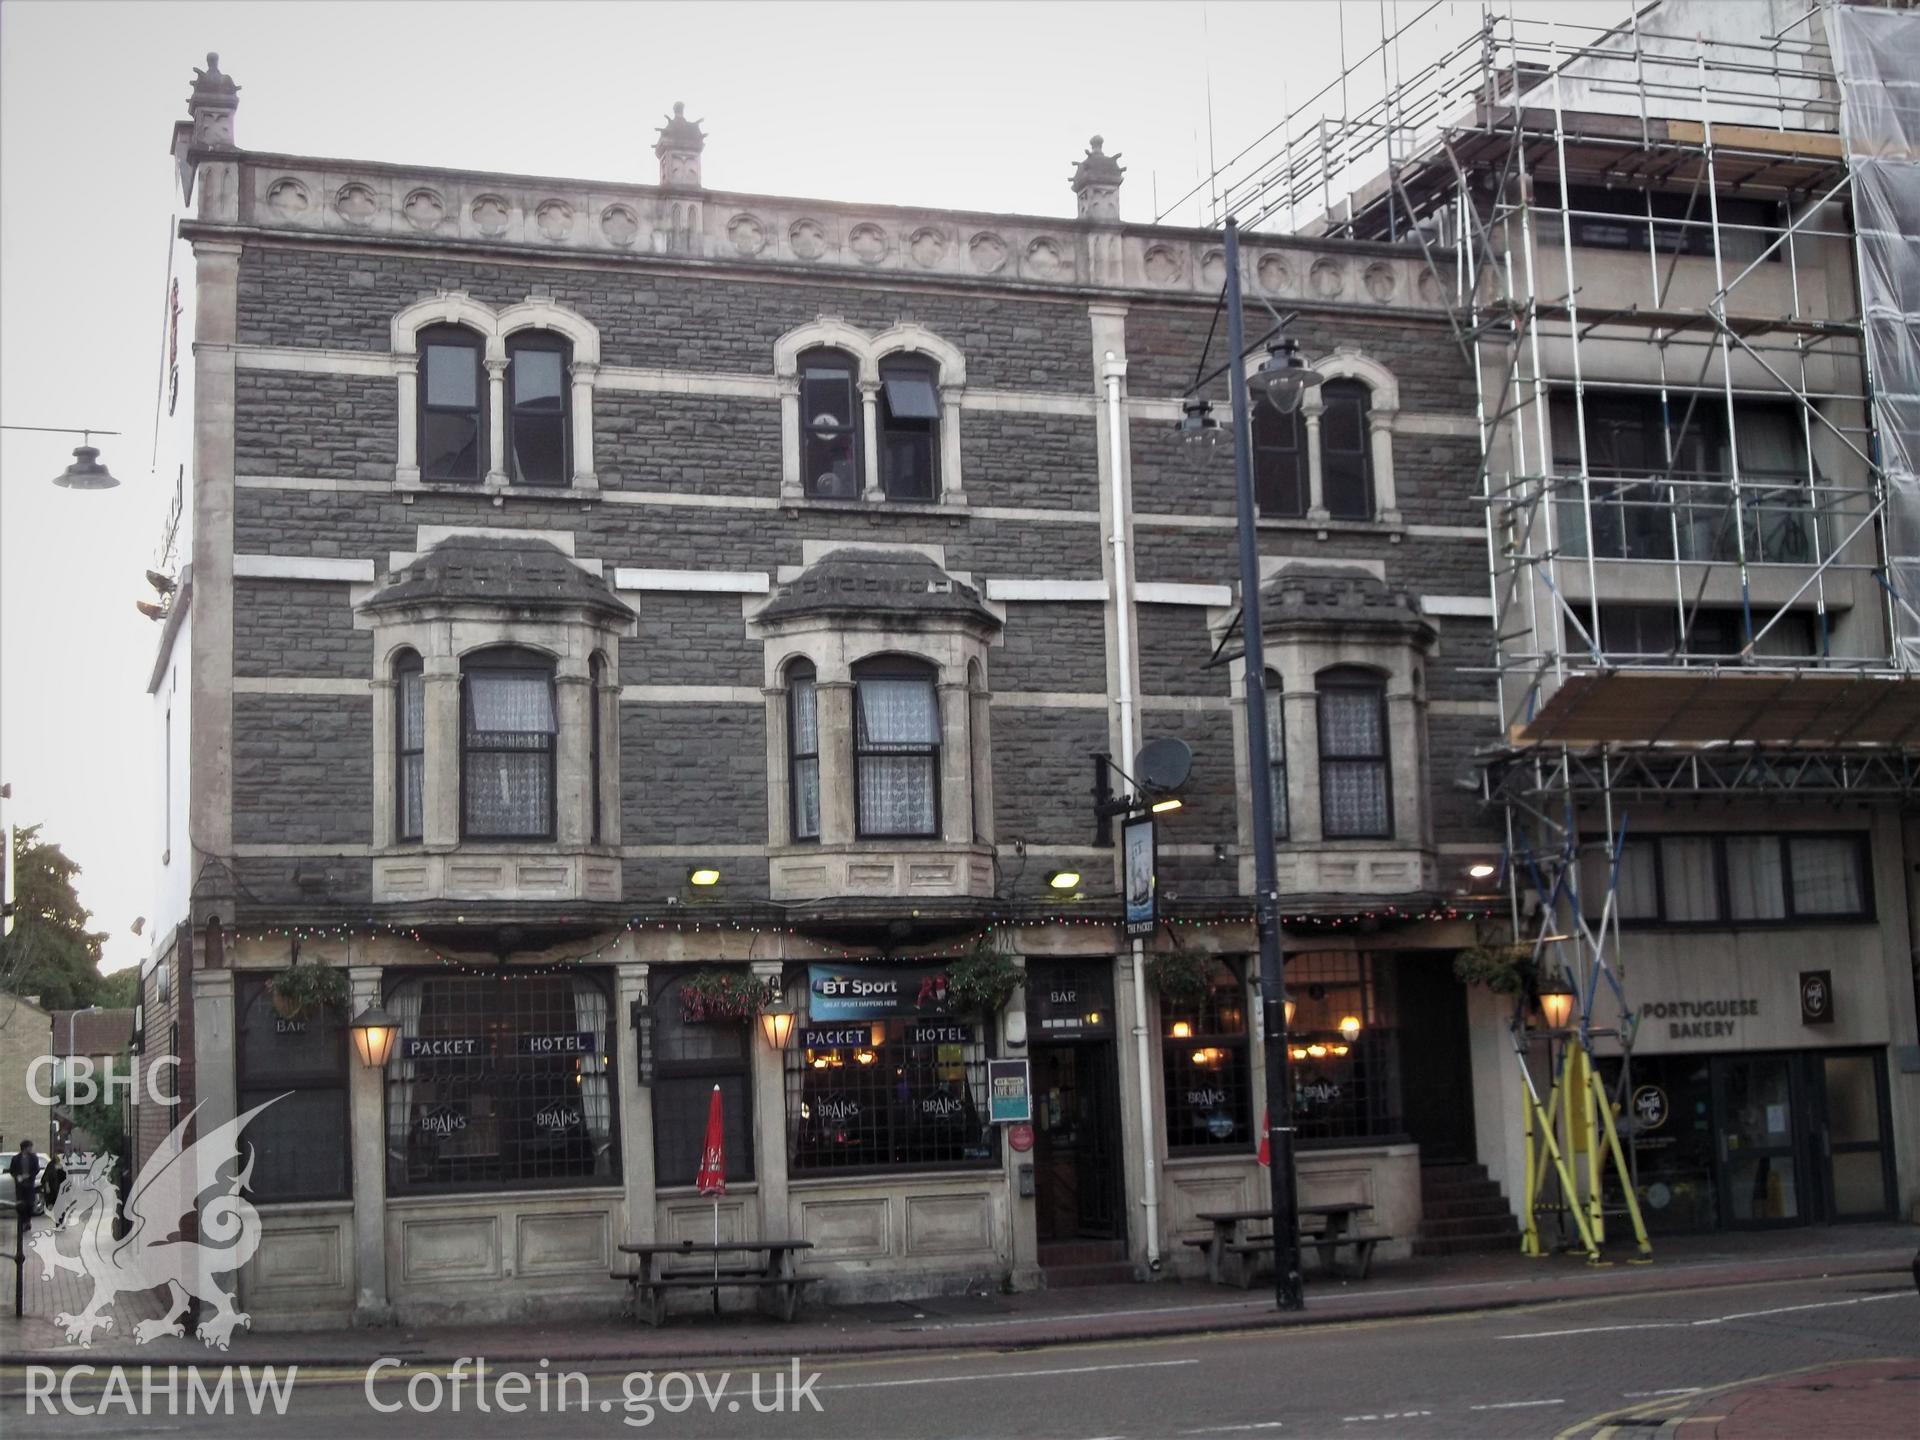 Colour photograph showing exterior of the Packet Hotel at 95 Bute Street, Butetown, Cardiff. Photographed during survey conducted by Adam N. Coward on 16th July 2018.